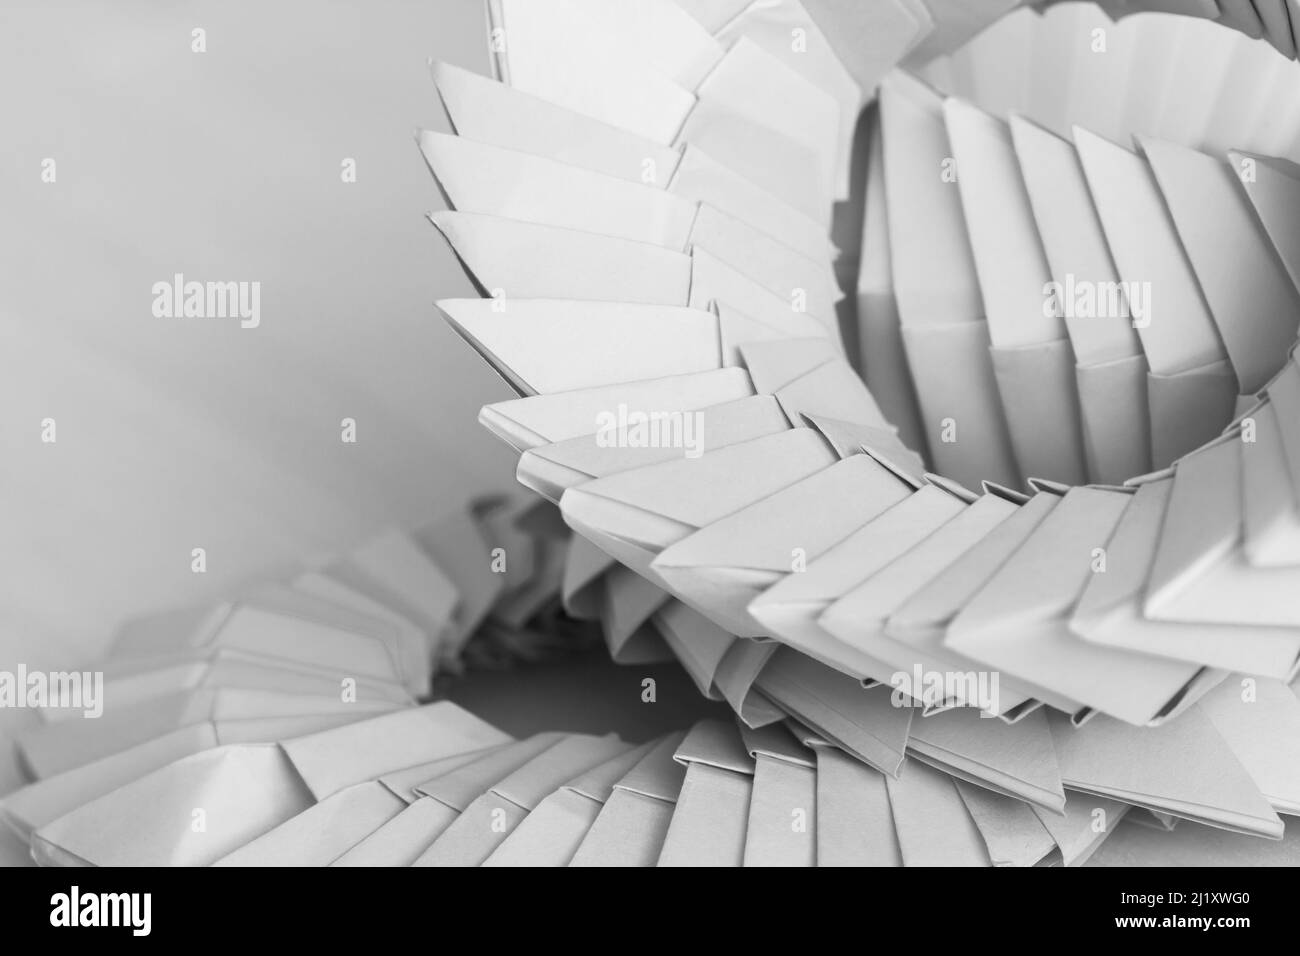 Origami rings. Abstract parametric objects made of linked paper sheets Stock Photo